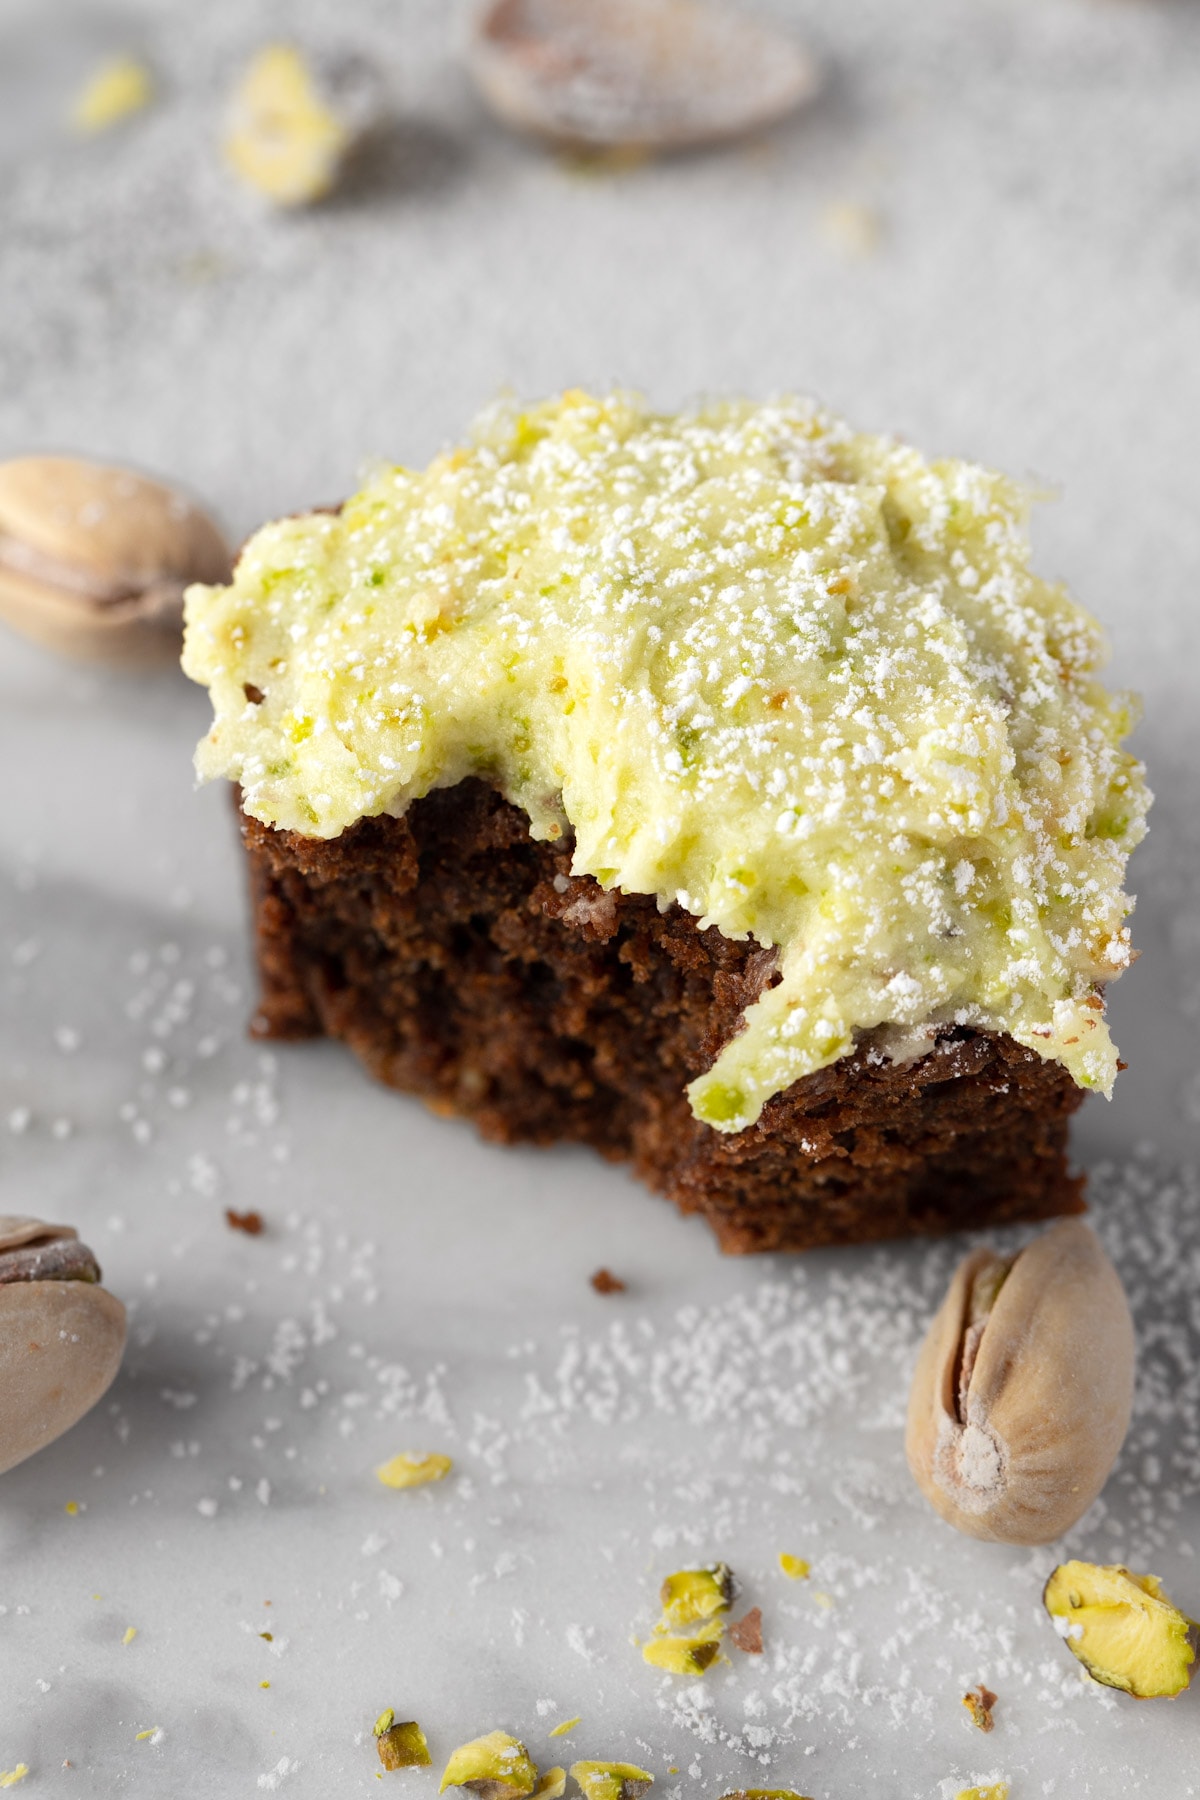 A chocolate brownie topped with pistachio frosting.